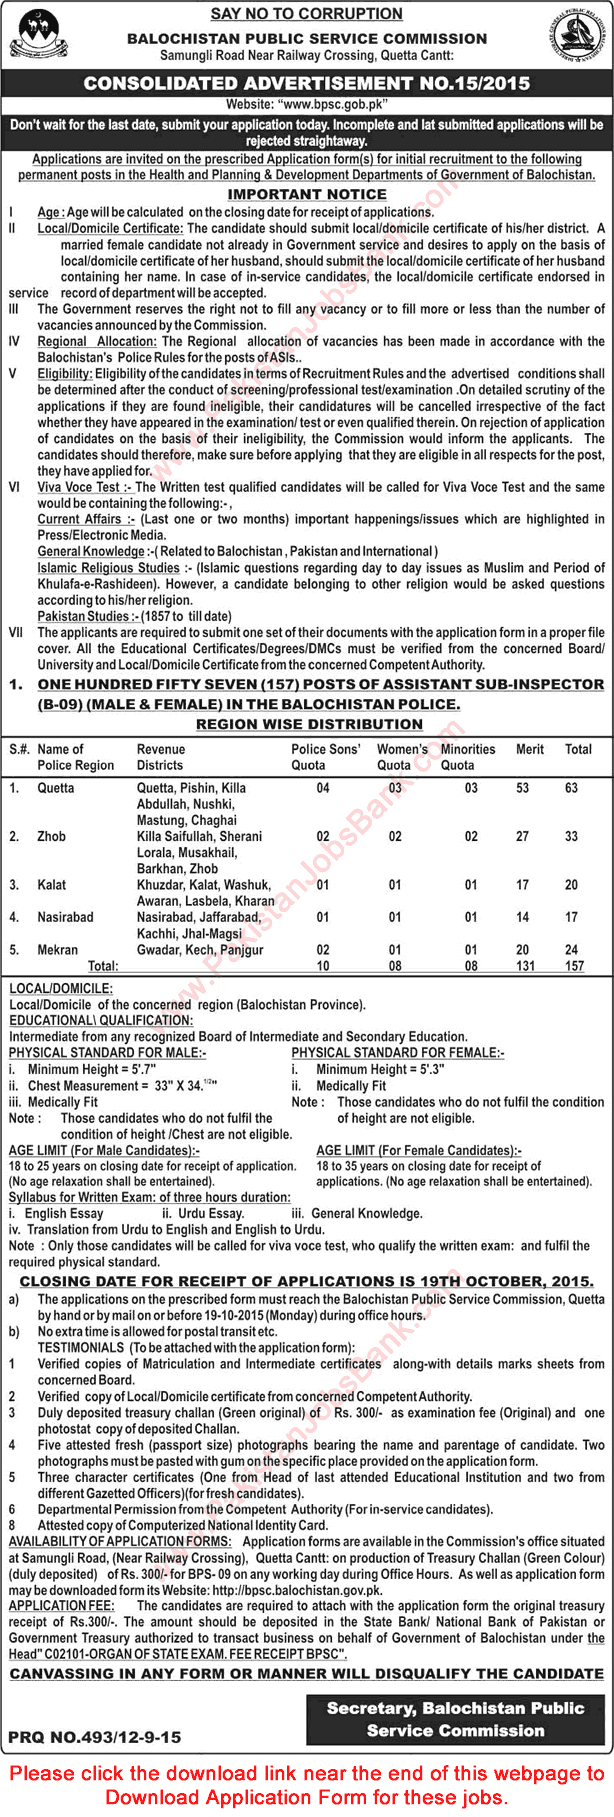 ASI Jobs in Balochistan Police 2015 September BPSC Application Form Download Latest